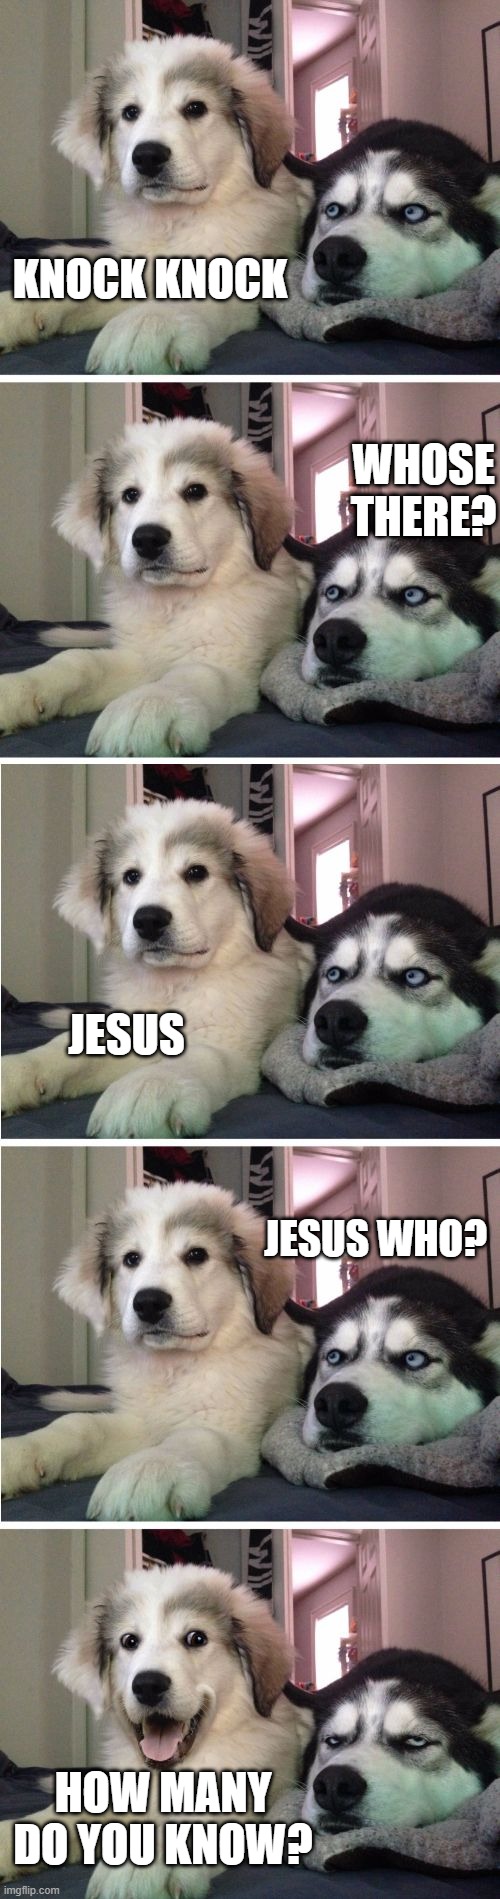 Knock Knock Dogs | KNOCK KNOCK; WHOSE THERE? JESUS; JESUS WHO? HOW MANY DO YOU KNOW? | image tagged in knock knock dogs | made w/ Imgflip meme maker